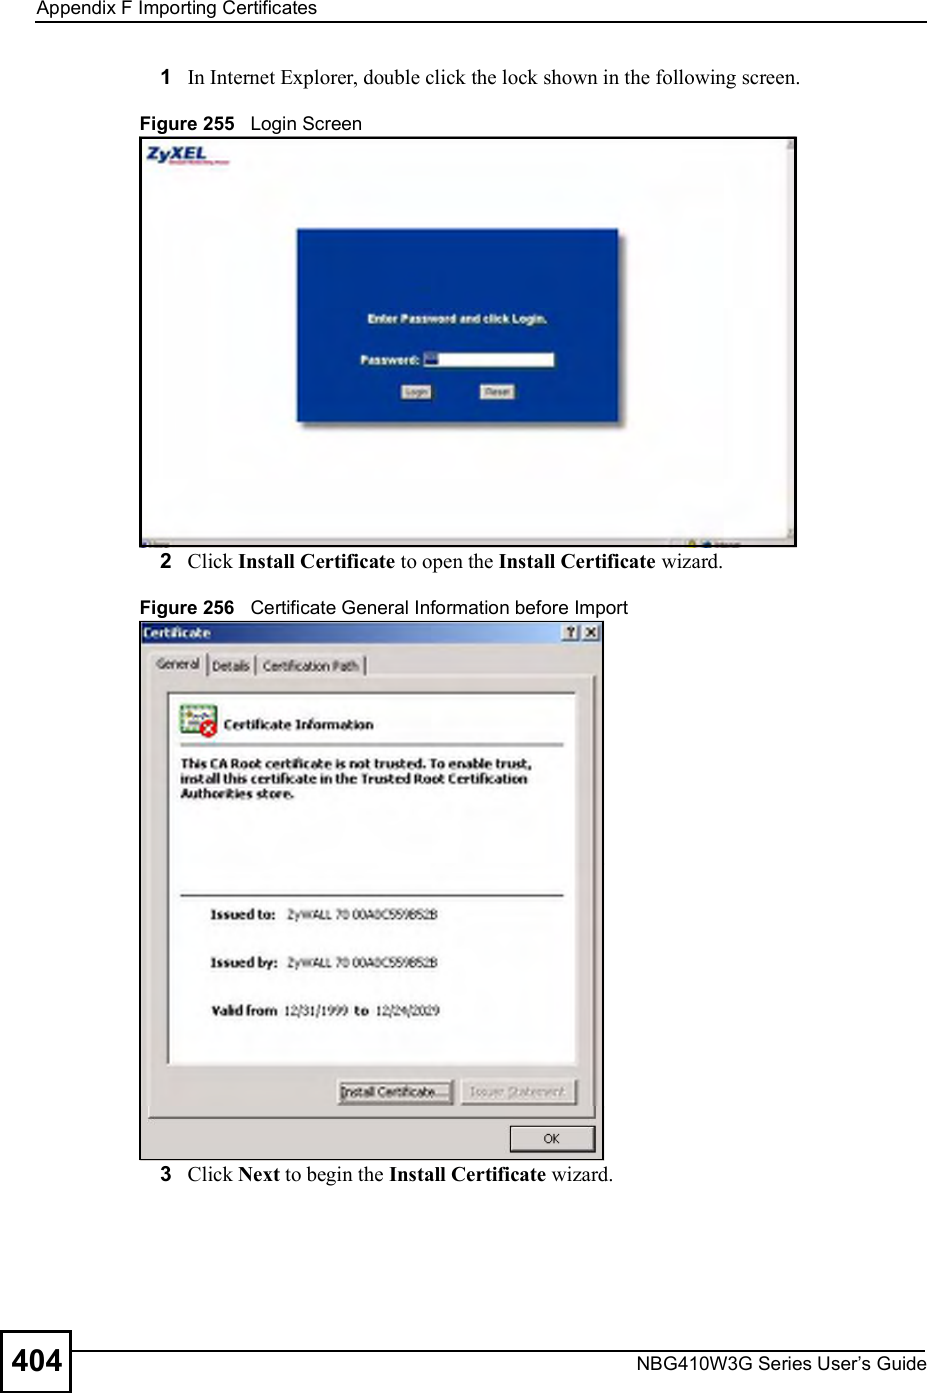 Appendix FImporting CertificatesNBG410W3G Series User s Guide4041In Internet Explorer, double click the lock shown in the following screen.Figure 255   Login Screen2Click Install Certificate to open the Install Certificate wizard.Figure 256   Certificate General Information before Import3Click Next to begin the Install Certificate wizard.